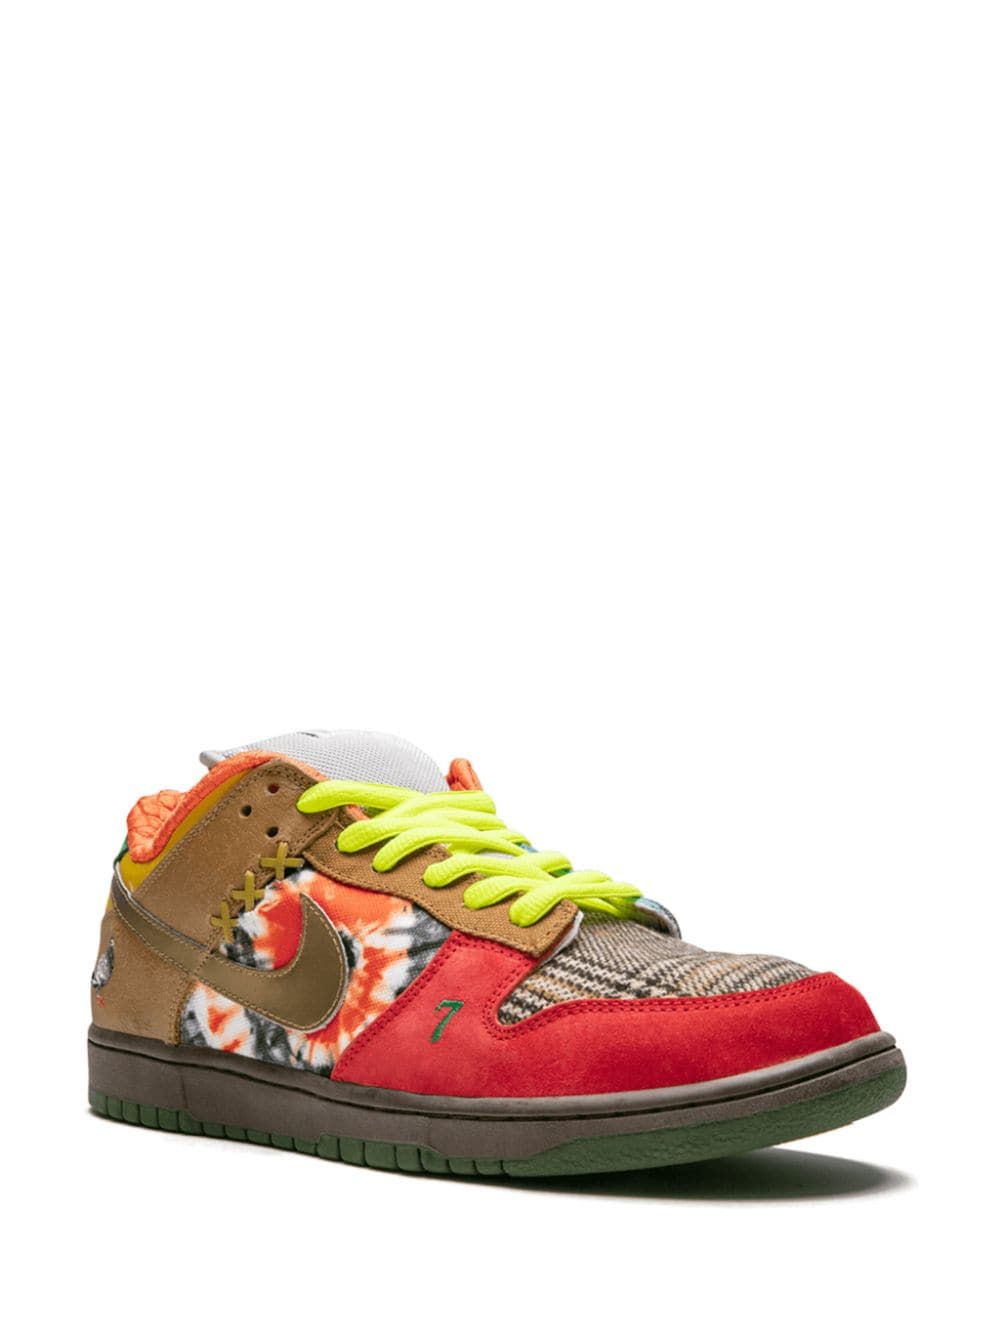 NIKE DUNK LOW - SB WHAT THE DUNK